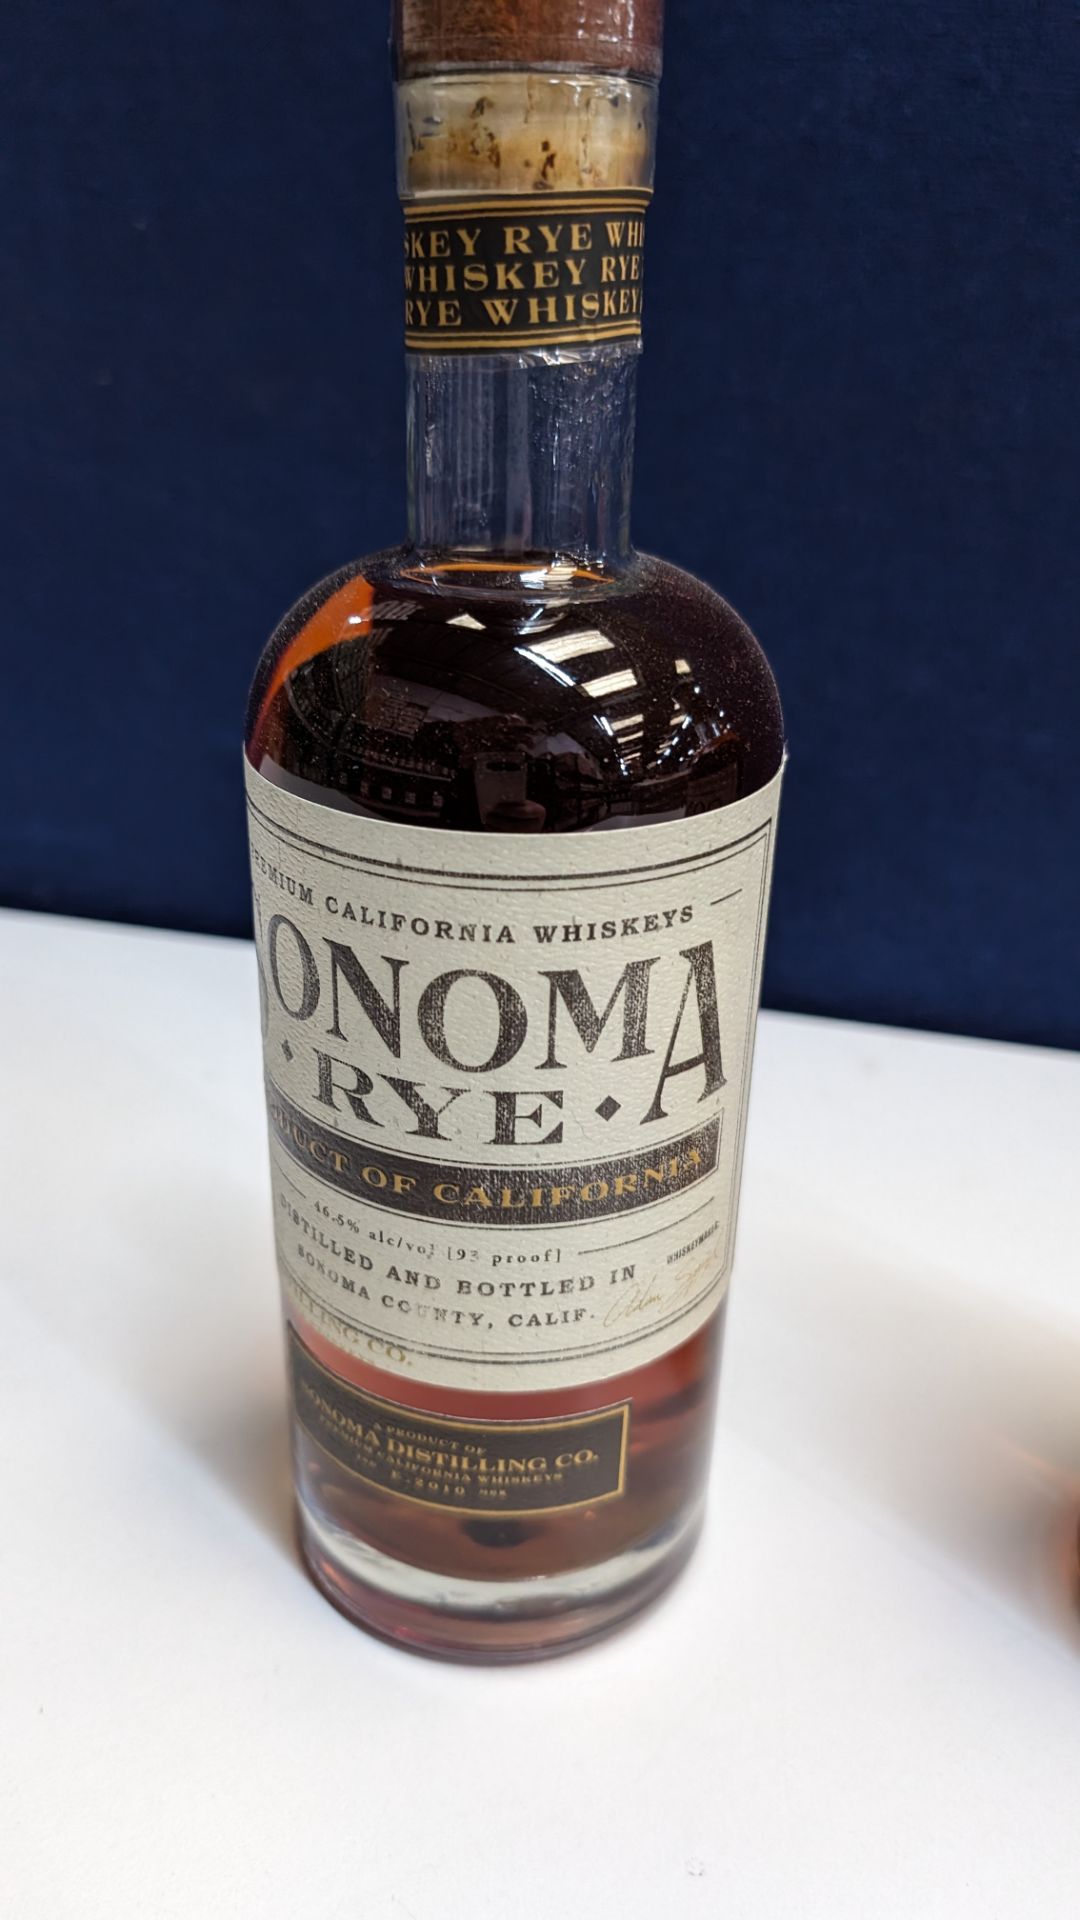 2 off 700ml bottles of Sonoma Rye Whiskey. 46.5% alc/vol (93 proof). Distilled and bottled in Sono - Image 3 of 7